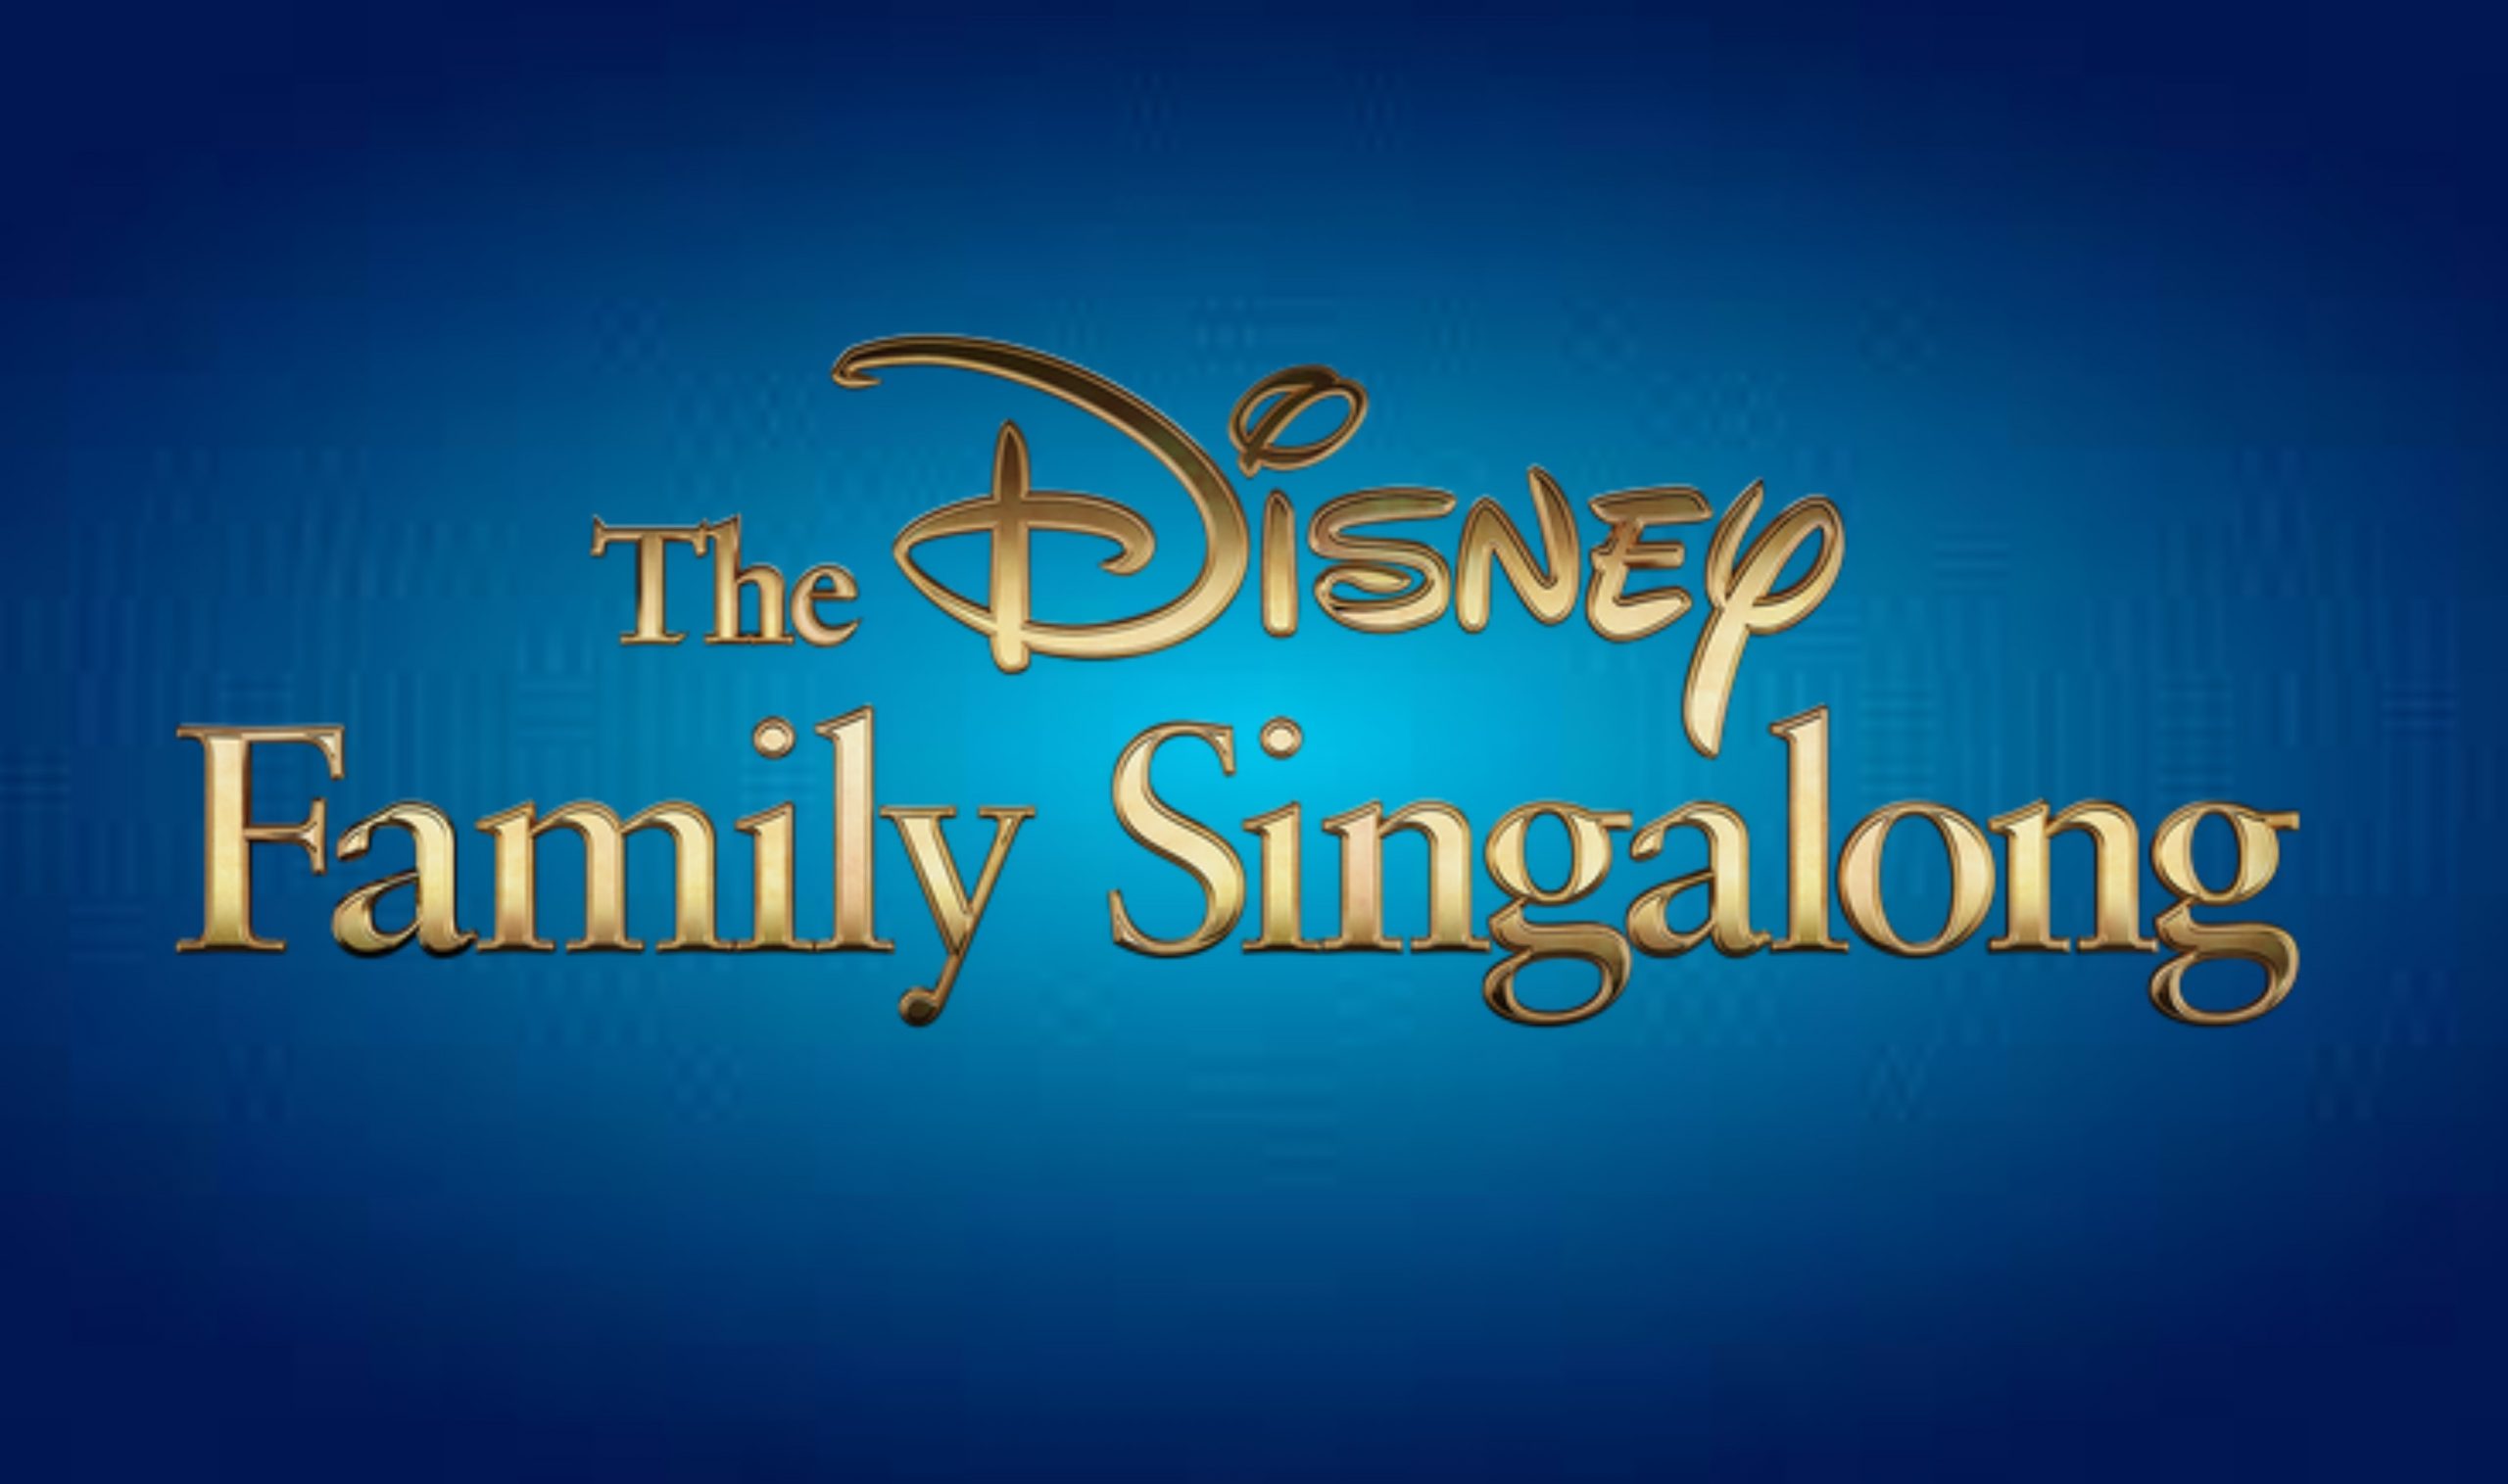 The Disney Family Singalong is now on Disney+